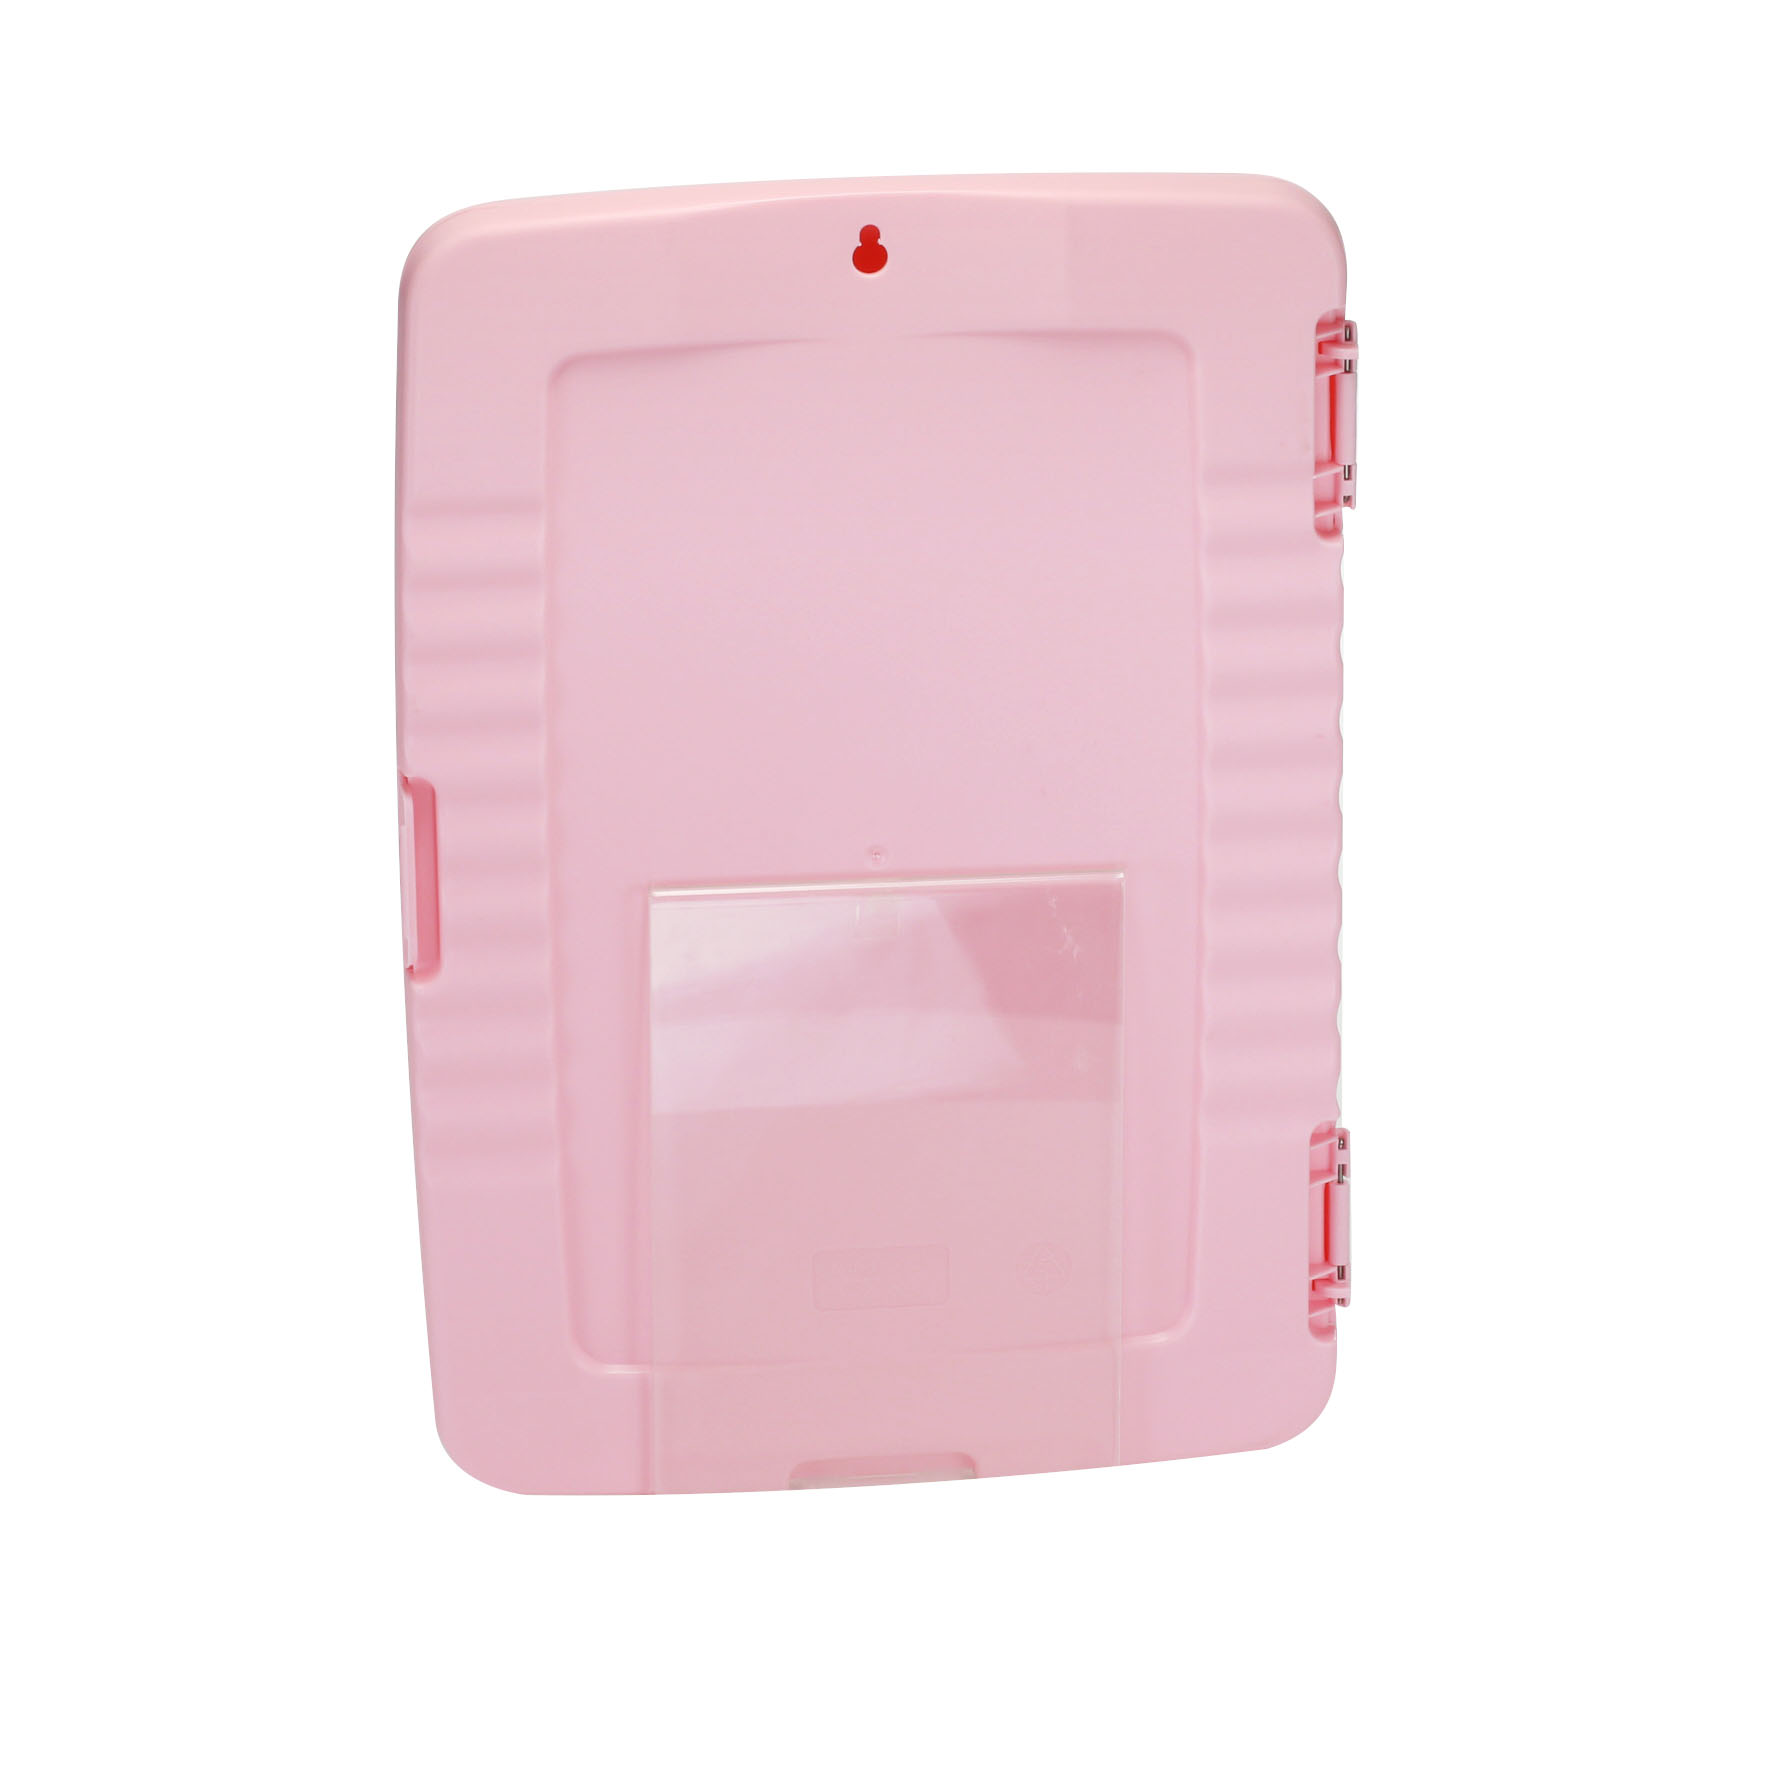 1 Clipboard Box 08925 Pink Officemate Breast Cancer Awareness Slim Clipboard Box 